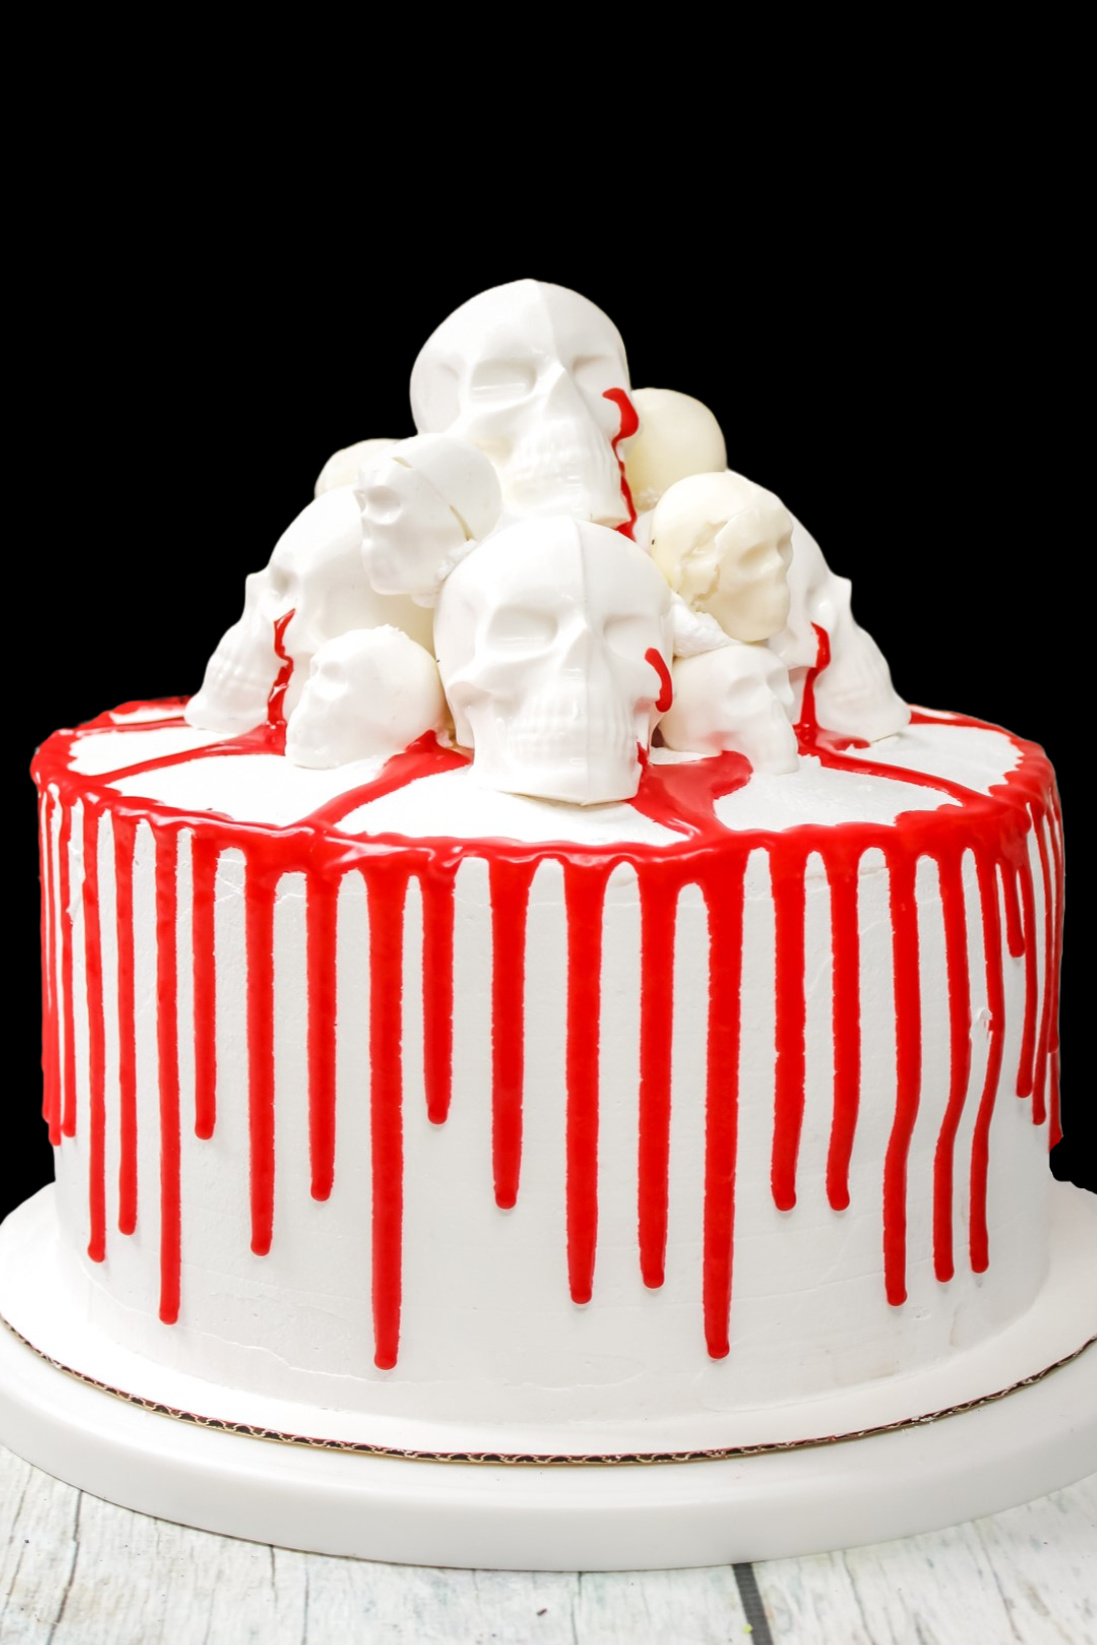 This bloody skull cake recipe is perfect for any Halloween party; pair it with some great looking gory decorations to really set the tone!